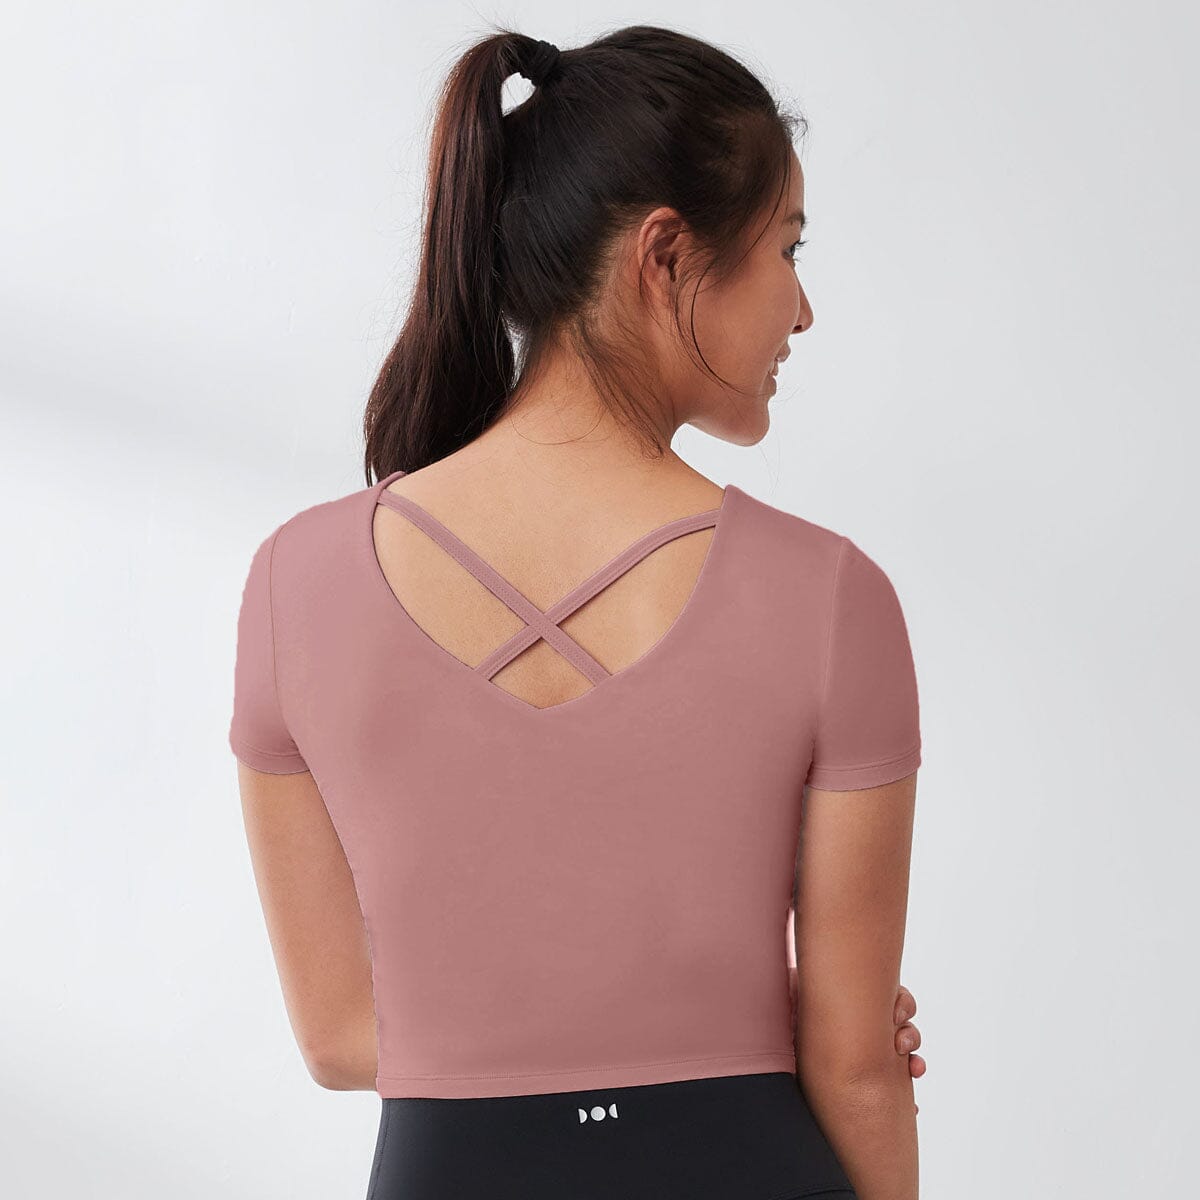 Effortless Yoga Low Impact Padded Short Sleeve Crop Top Tops Her own words SPORTS New Rose Taupe x Ashes of Roses XS 